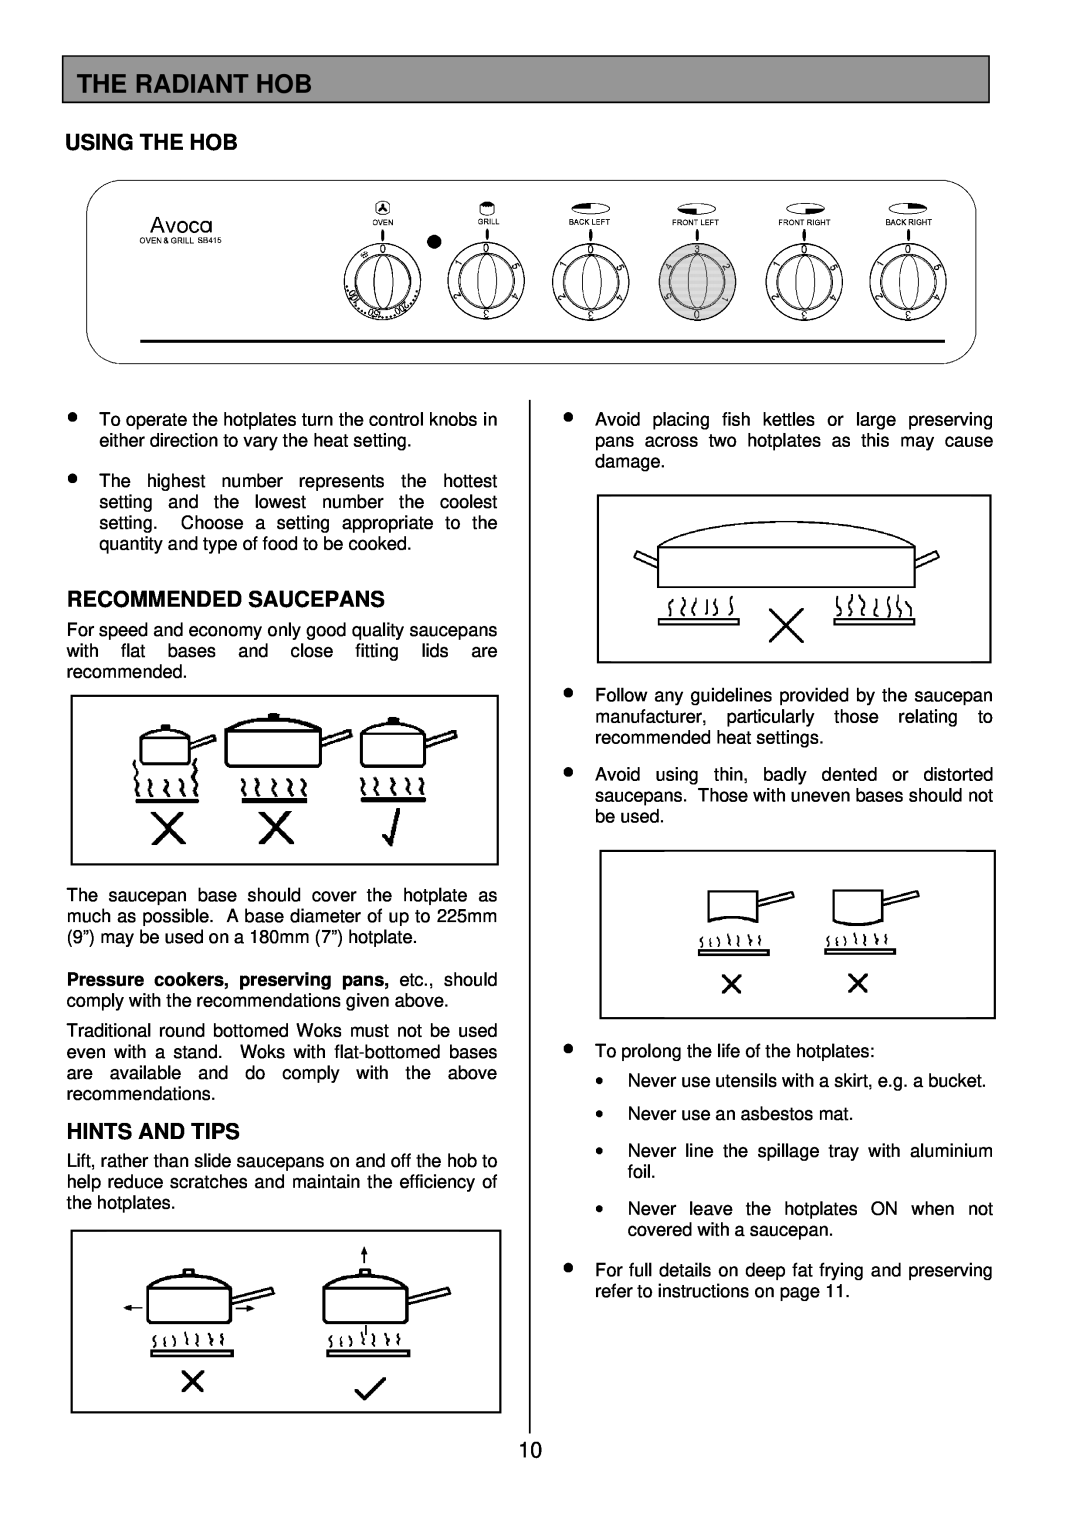 Tricity Bendix SB 415GR installation instructions The Radiant Hob, Using The Hob, Recommended Saucepans, Hints And Tips 